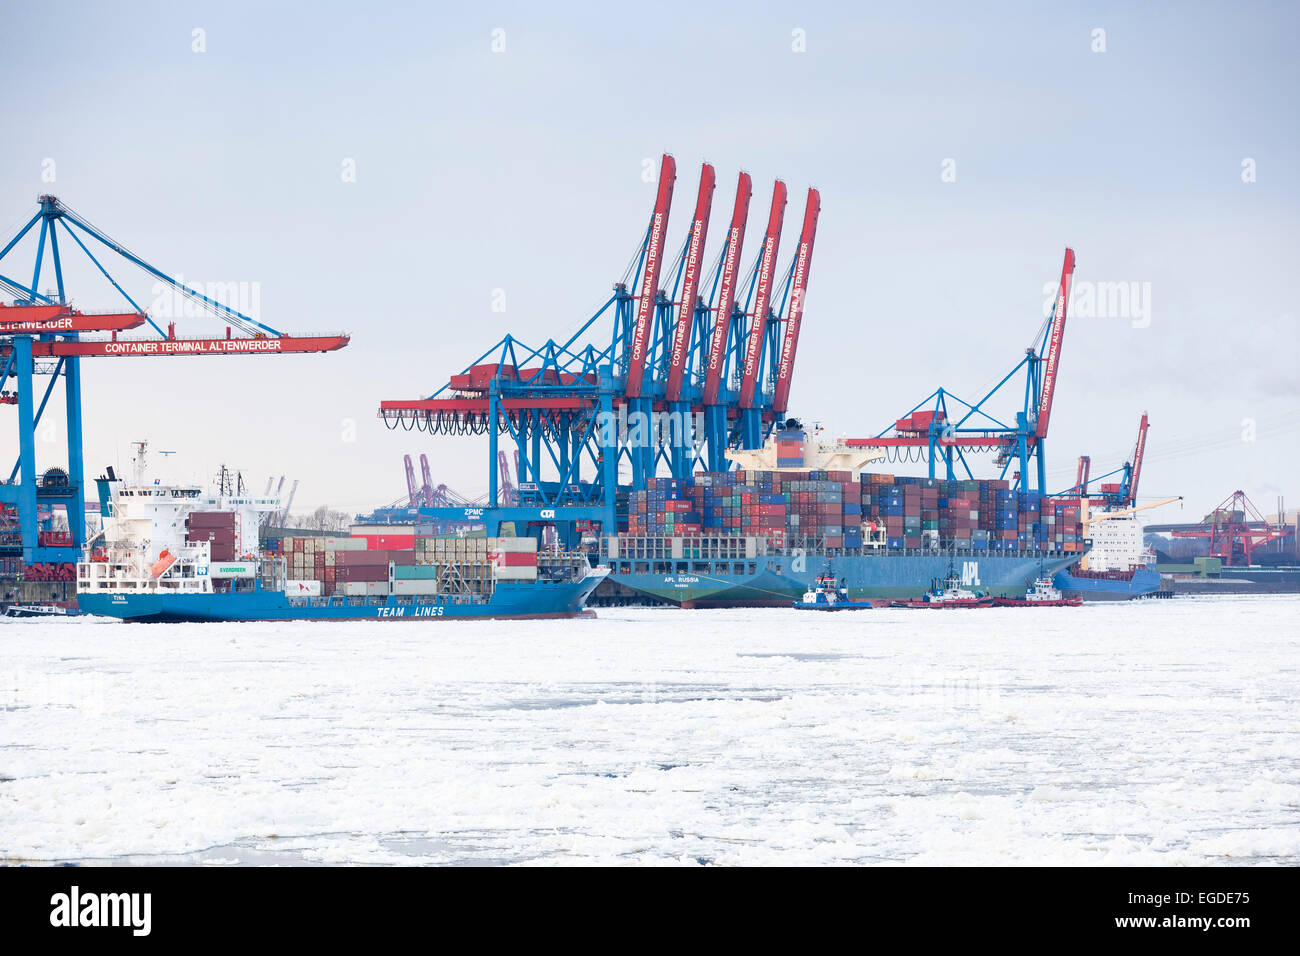 Container ship in front of a container bridge in winter, Altenwerder, Hamburg, Germany Stock Photo